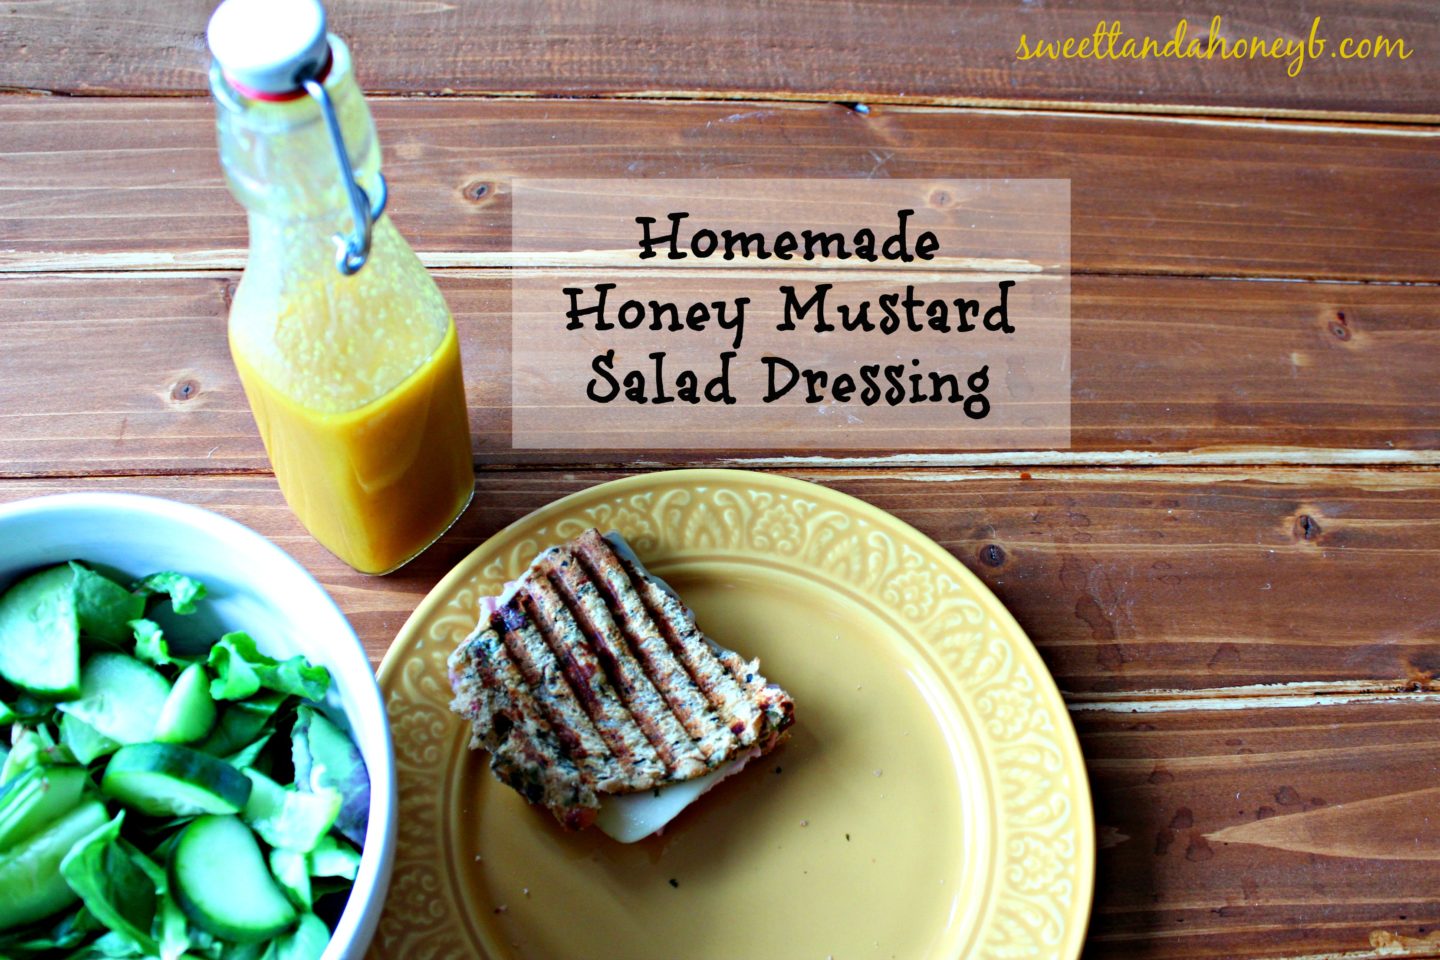 Warm Sandwiches, Mixed Greens, and Homemade Honey Mustard Dressing